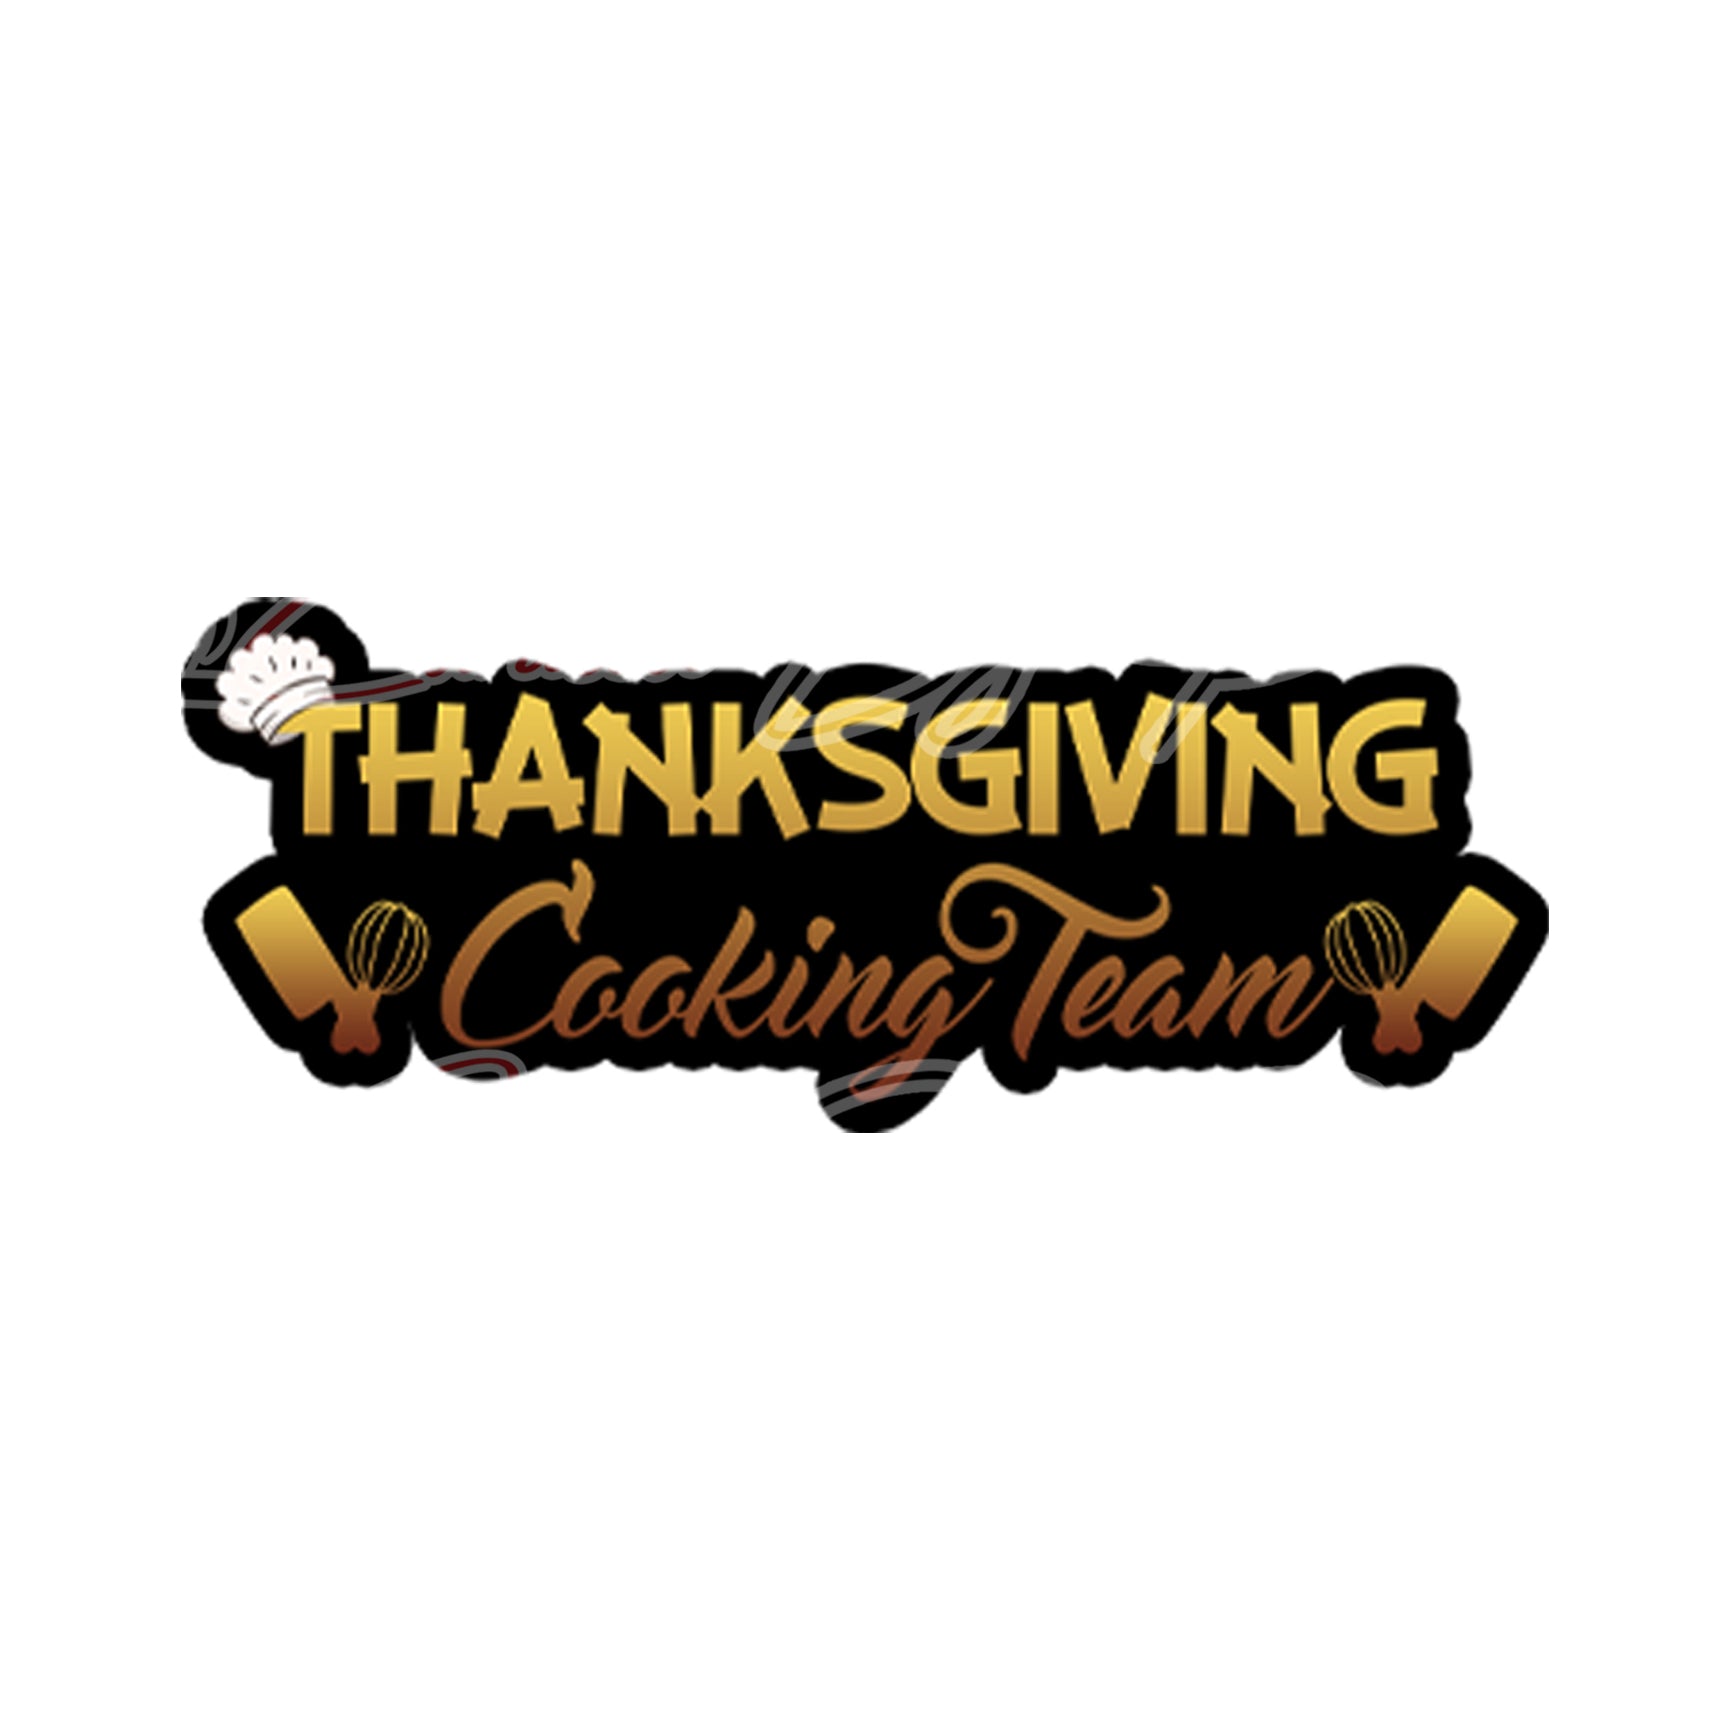 Thanksgiving cooking team prop-Thanksgiving day prop-thanksgiving day photo booth prop-photo booth props- props-photo booth props-custom props- custom prop signs-props -Curated by Phoenix